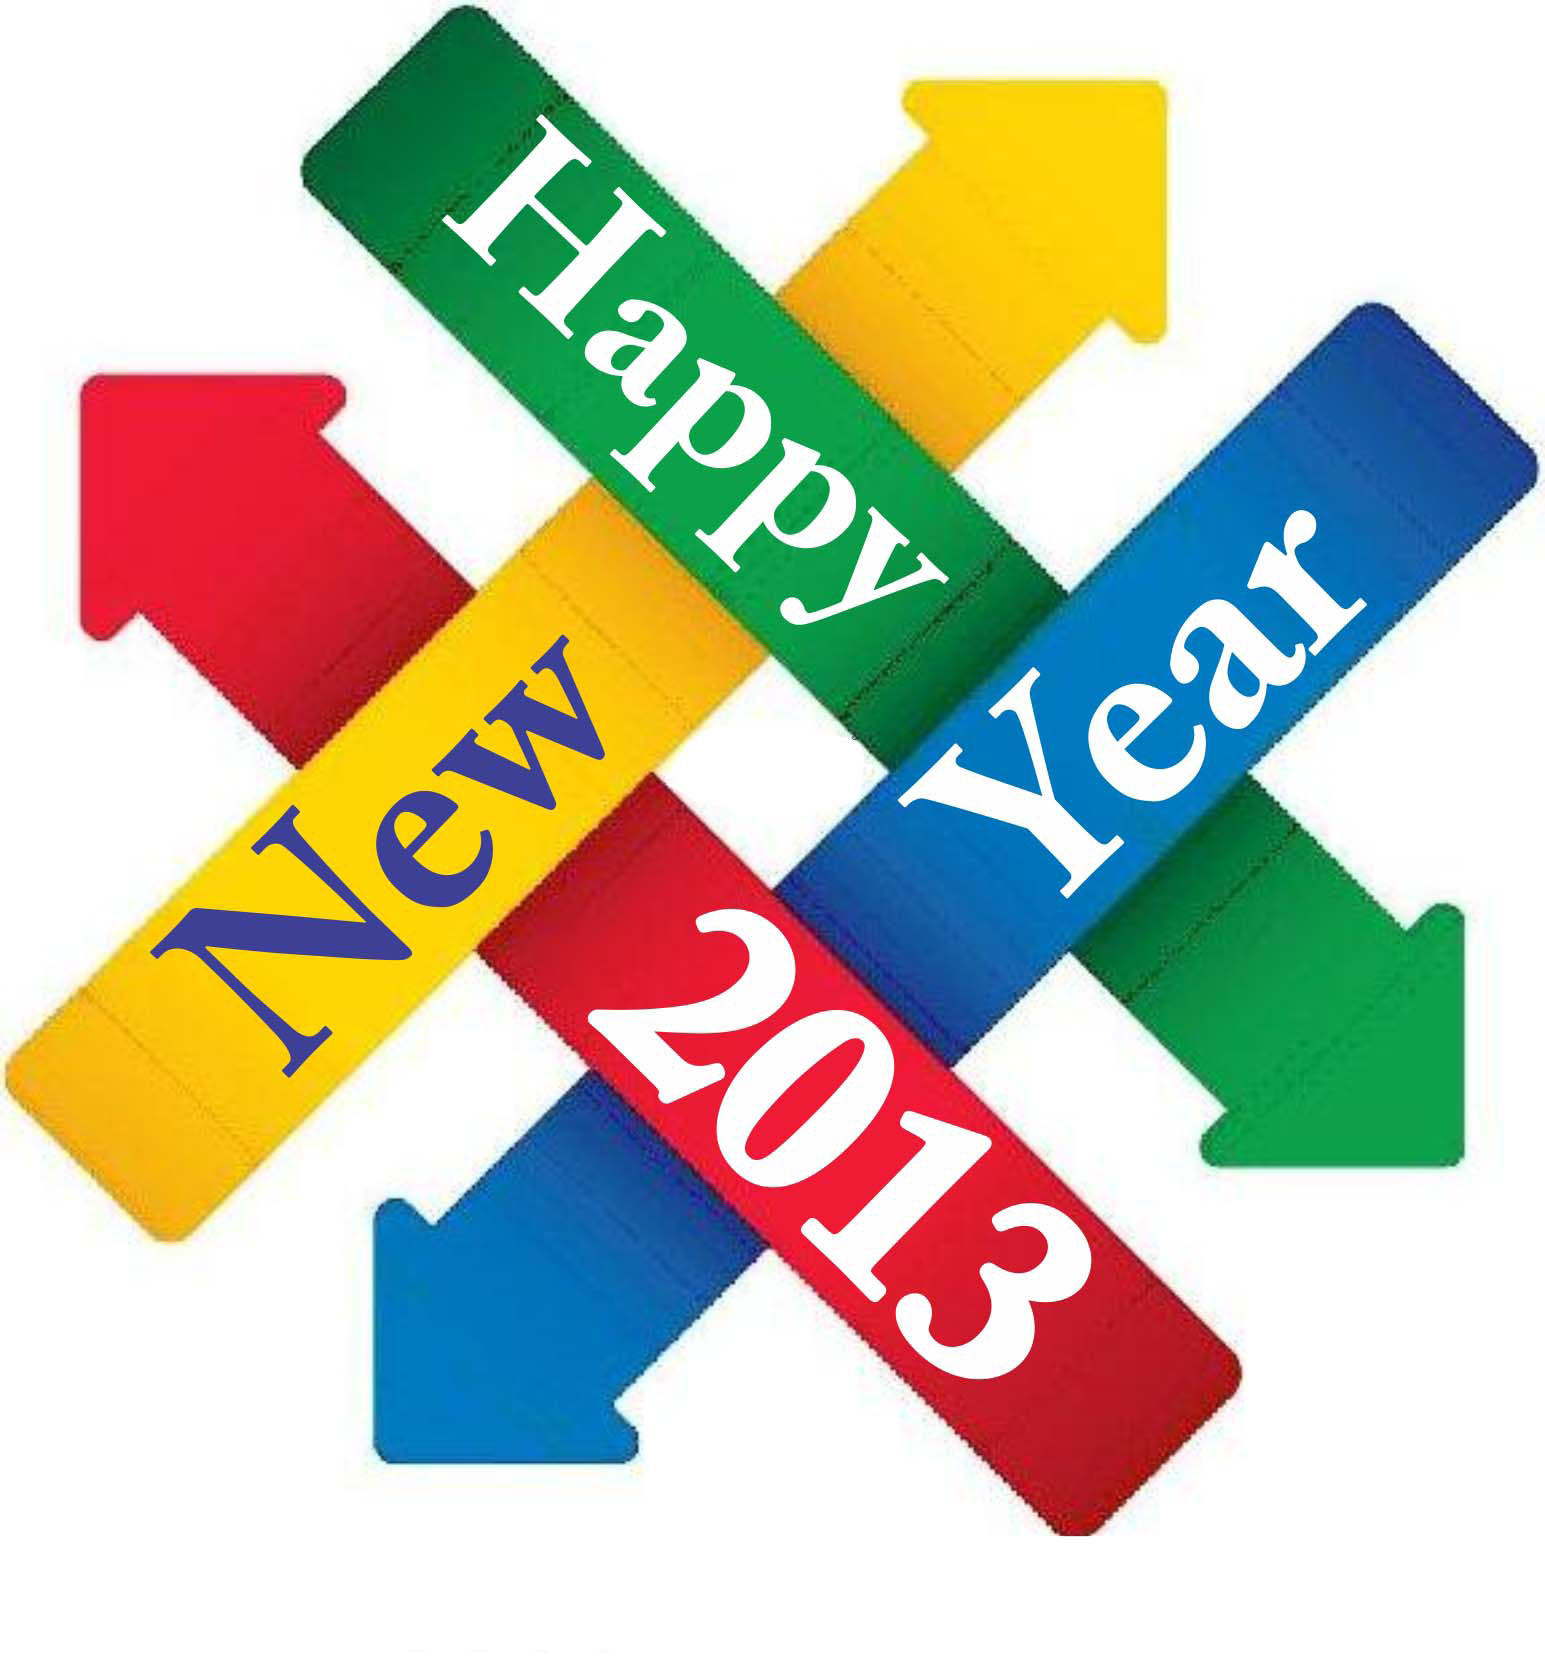 happy new year 2013 hd wallpapers 1 COLLECTION OF BEAUTIFUL HAPPY NEW YEAR 2013 WALLPAPERS